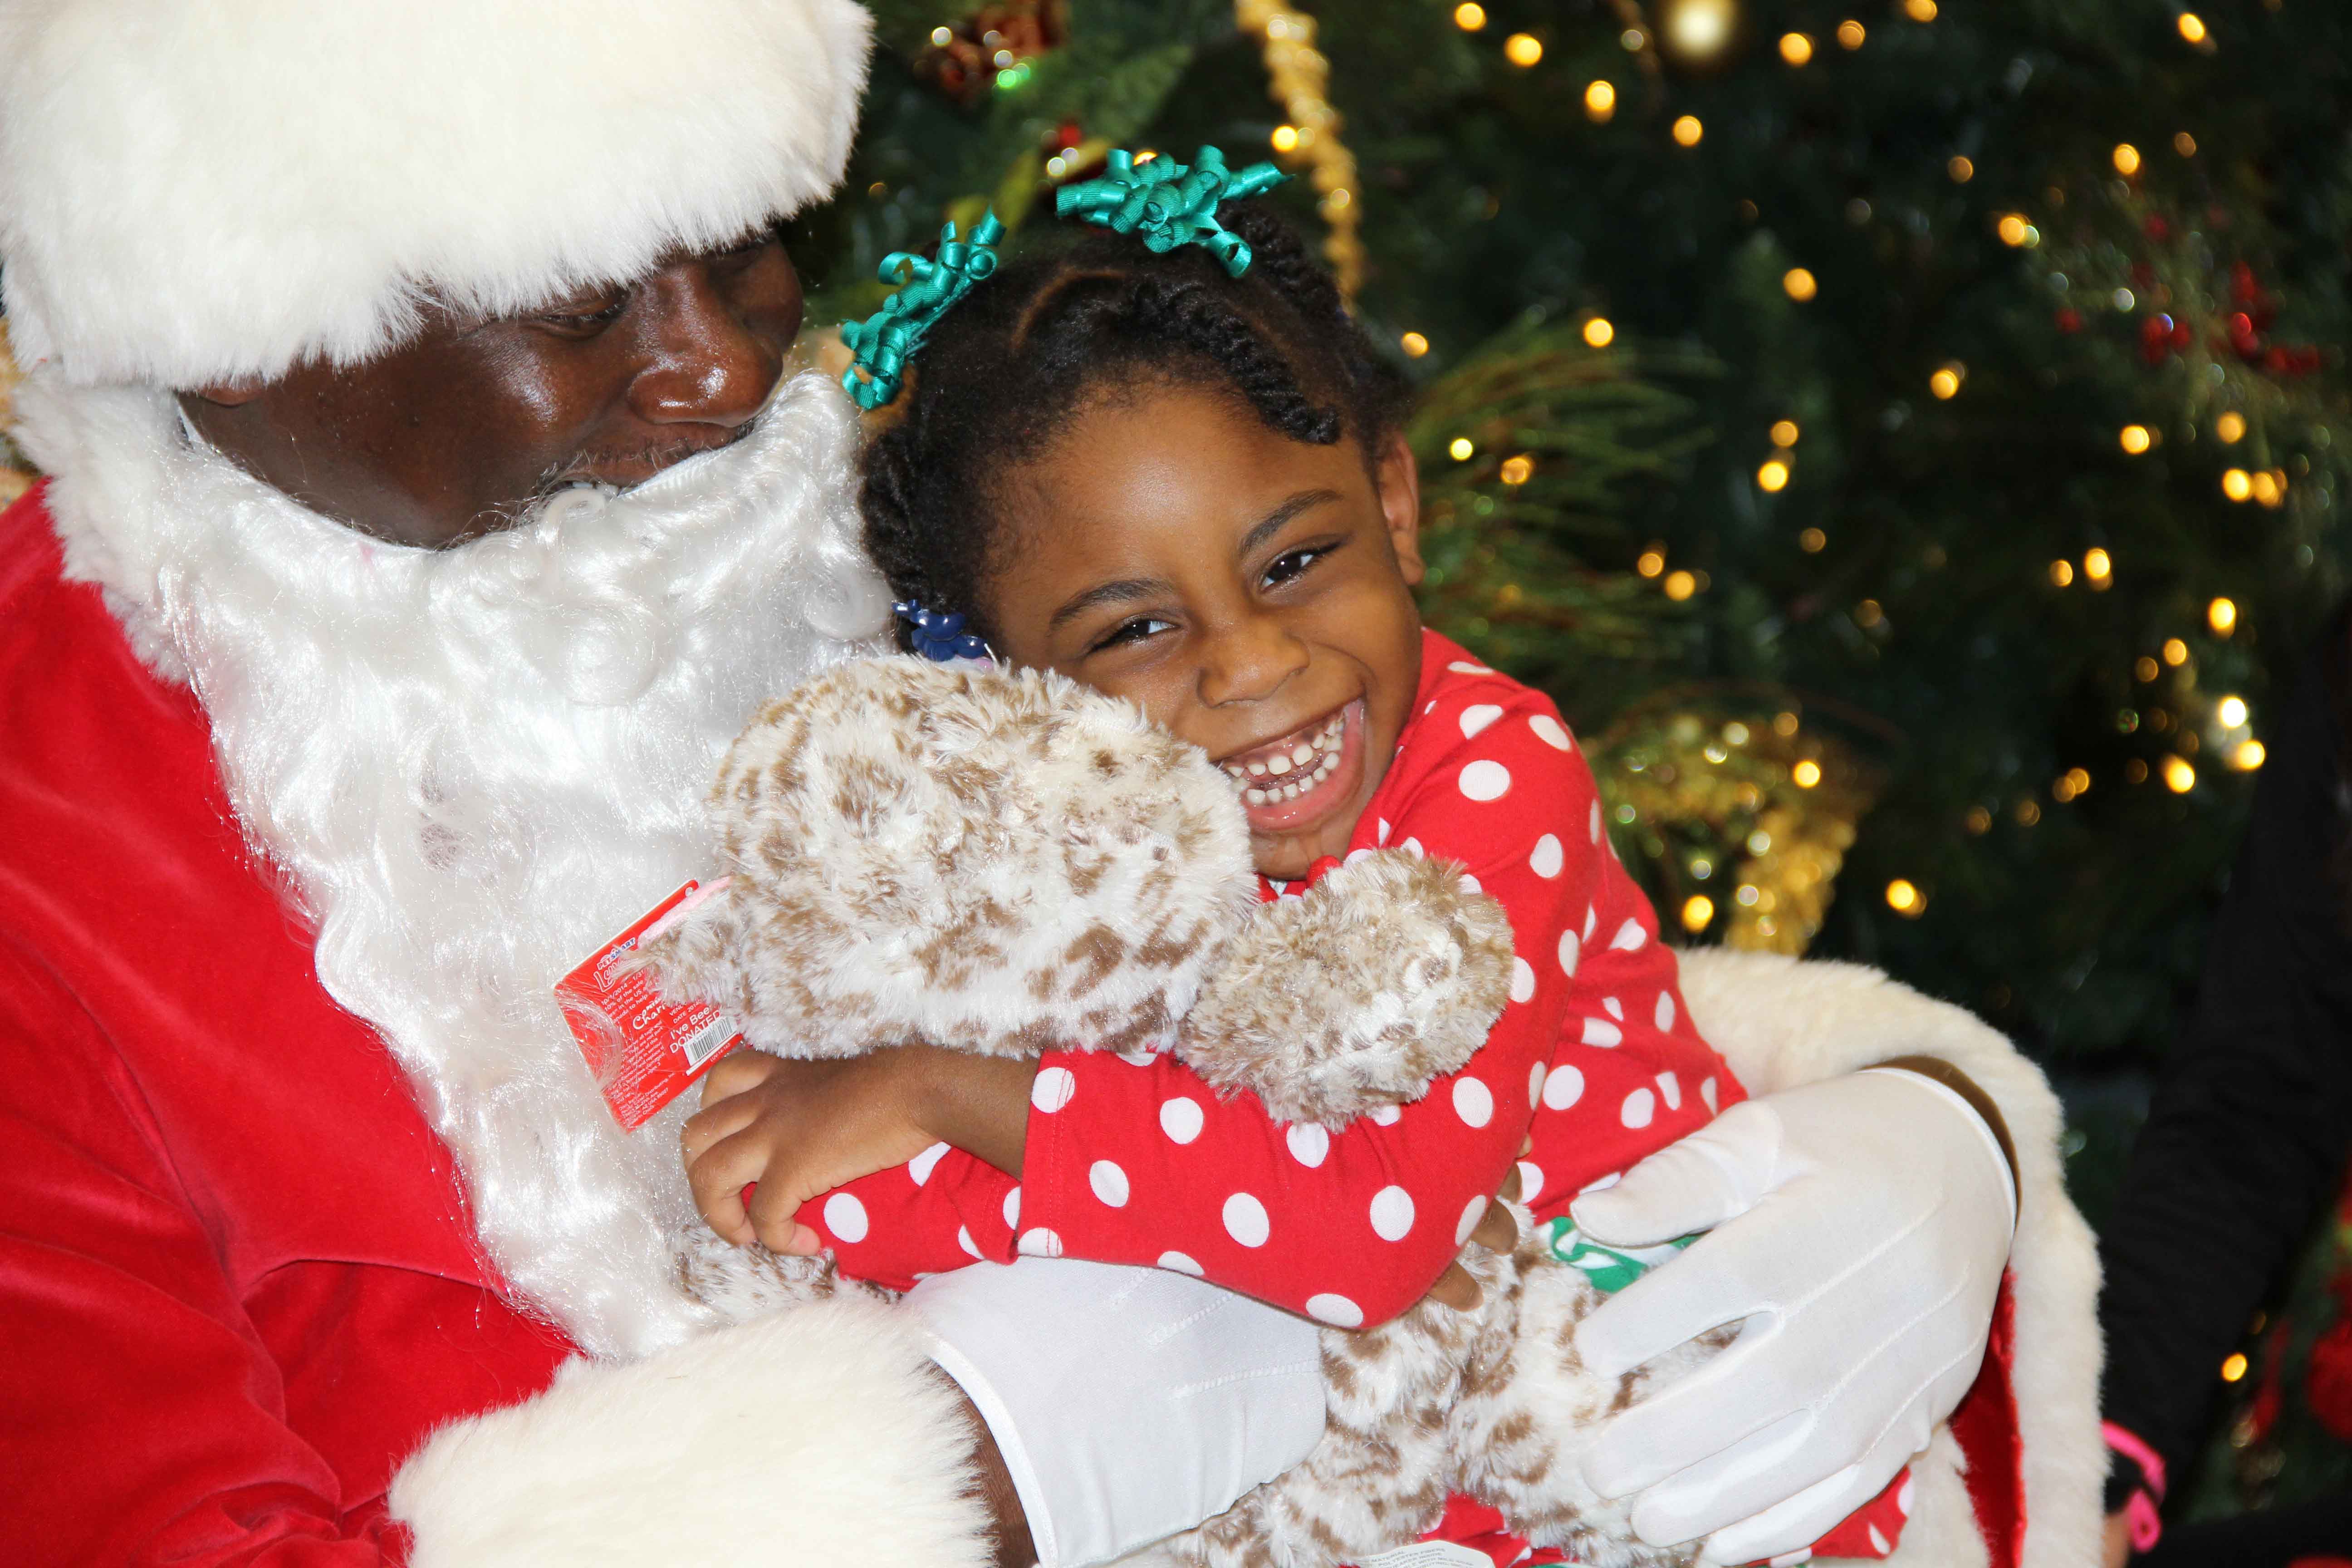 Volunteers of America Greater Baton Rouge Child with Santa on Christmas